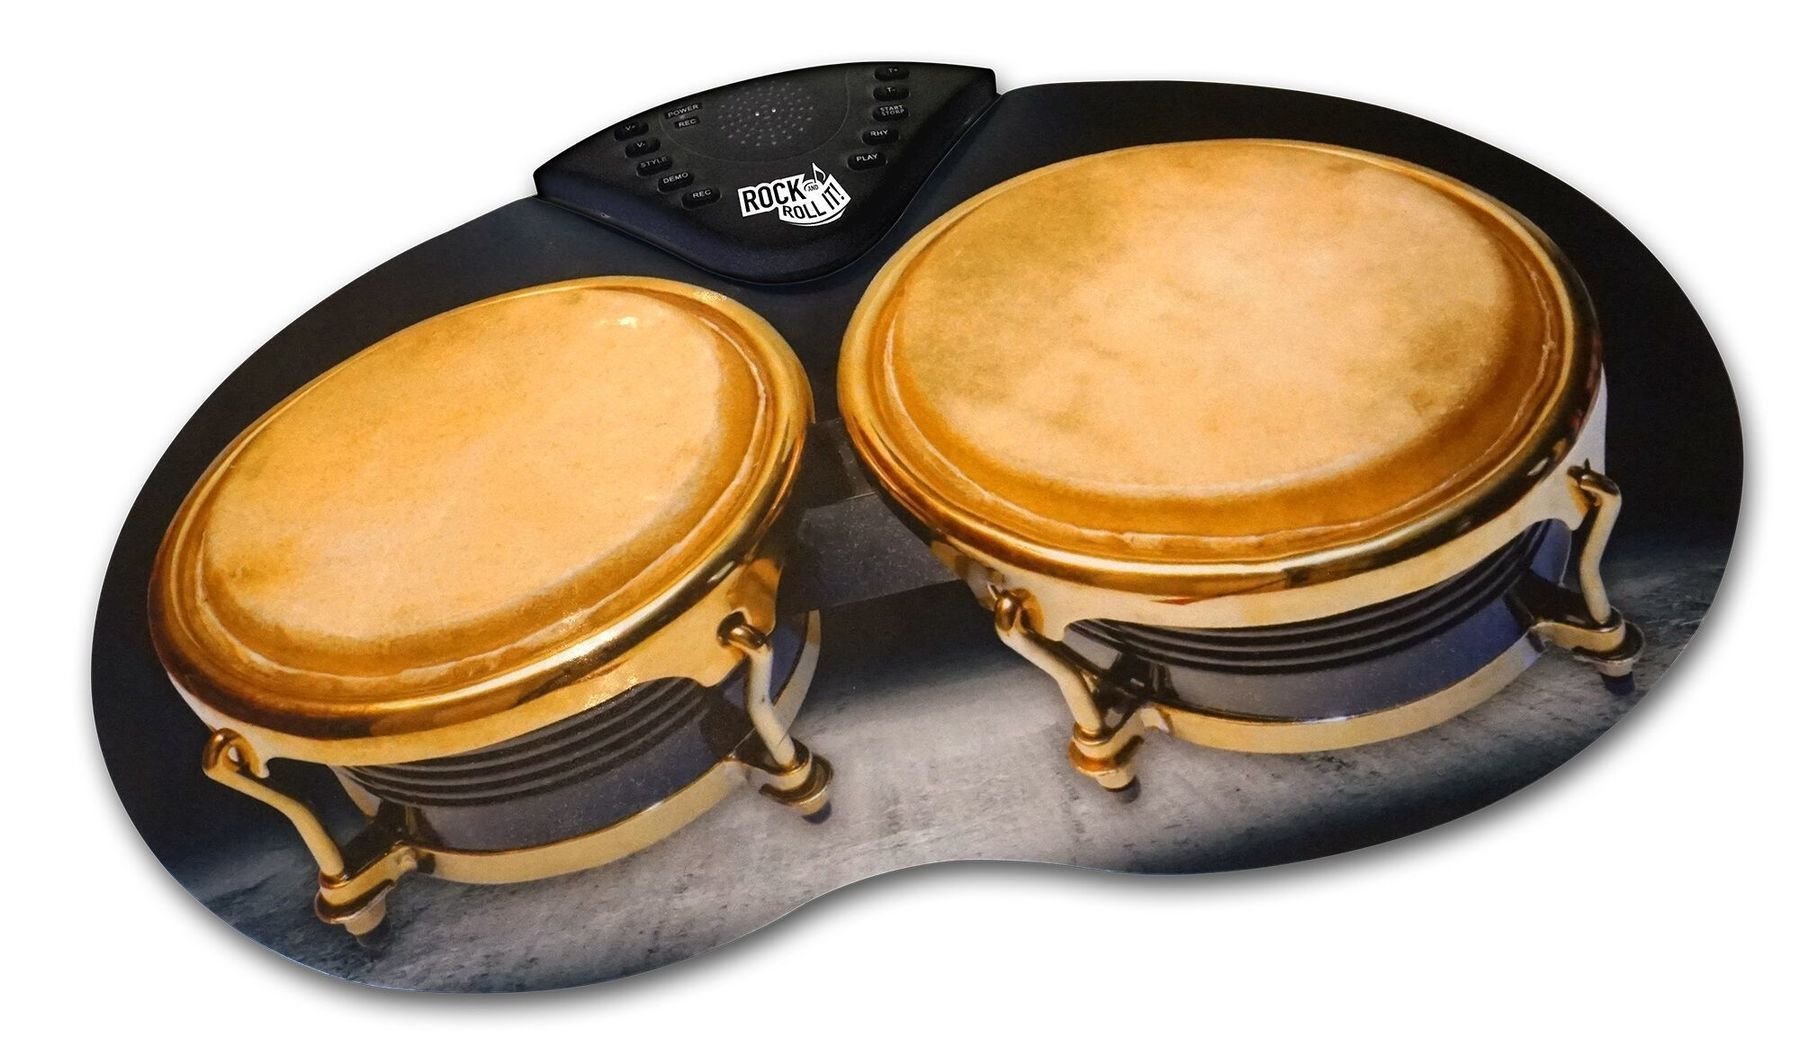 Compact Electronic Drums Mukikim Rock And Roll It - Bongos